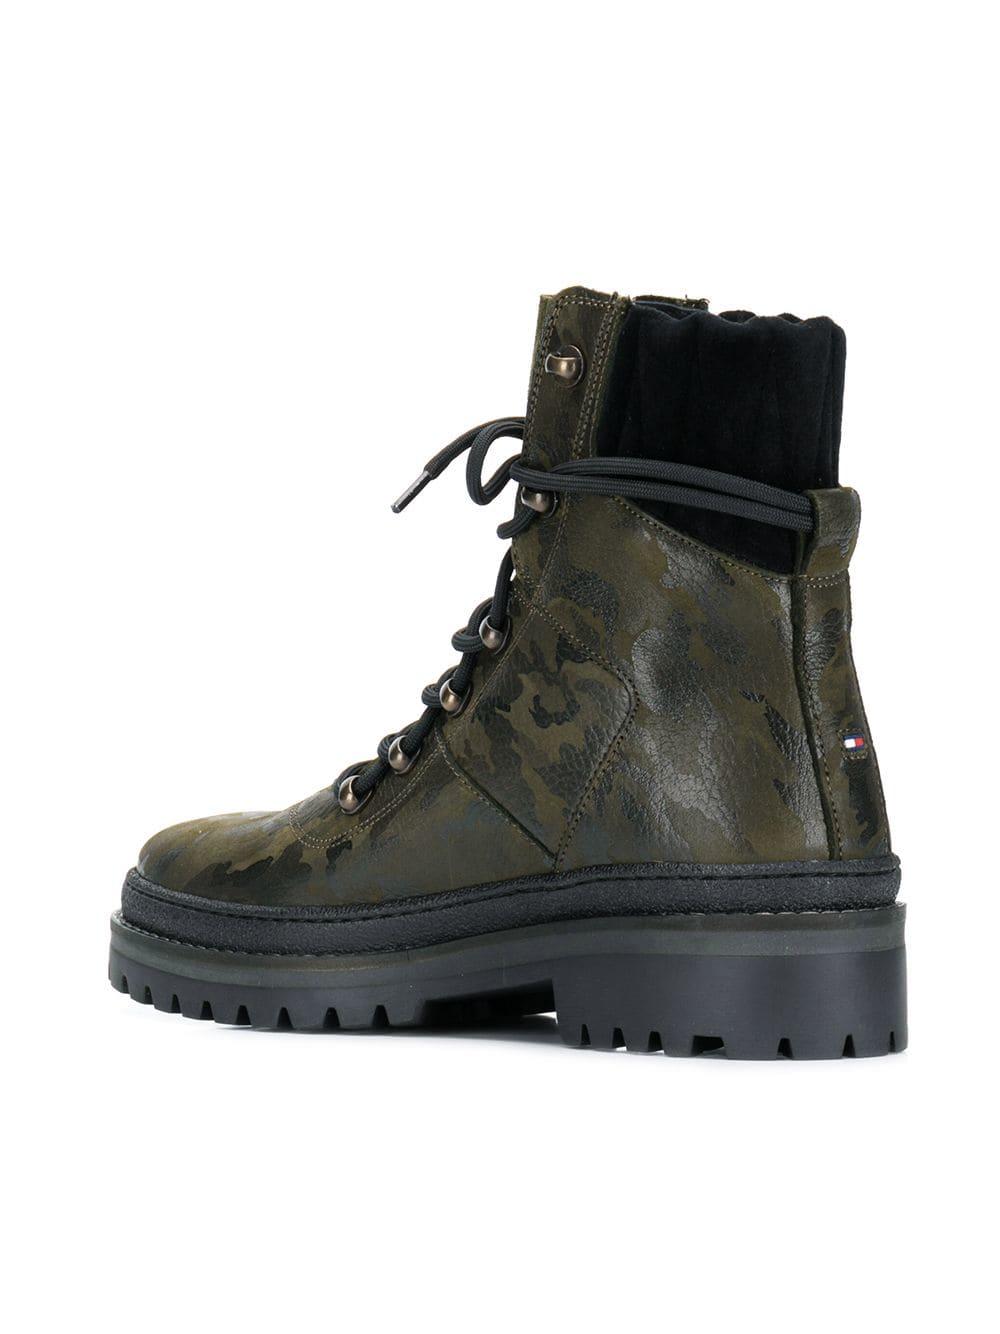 tommy hilfiger camo boots